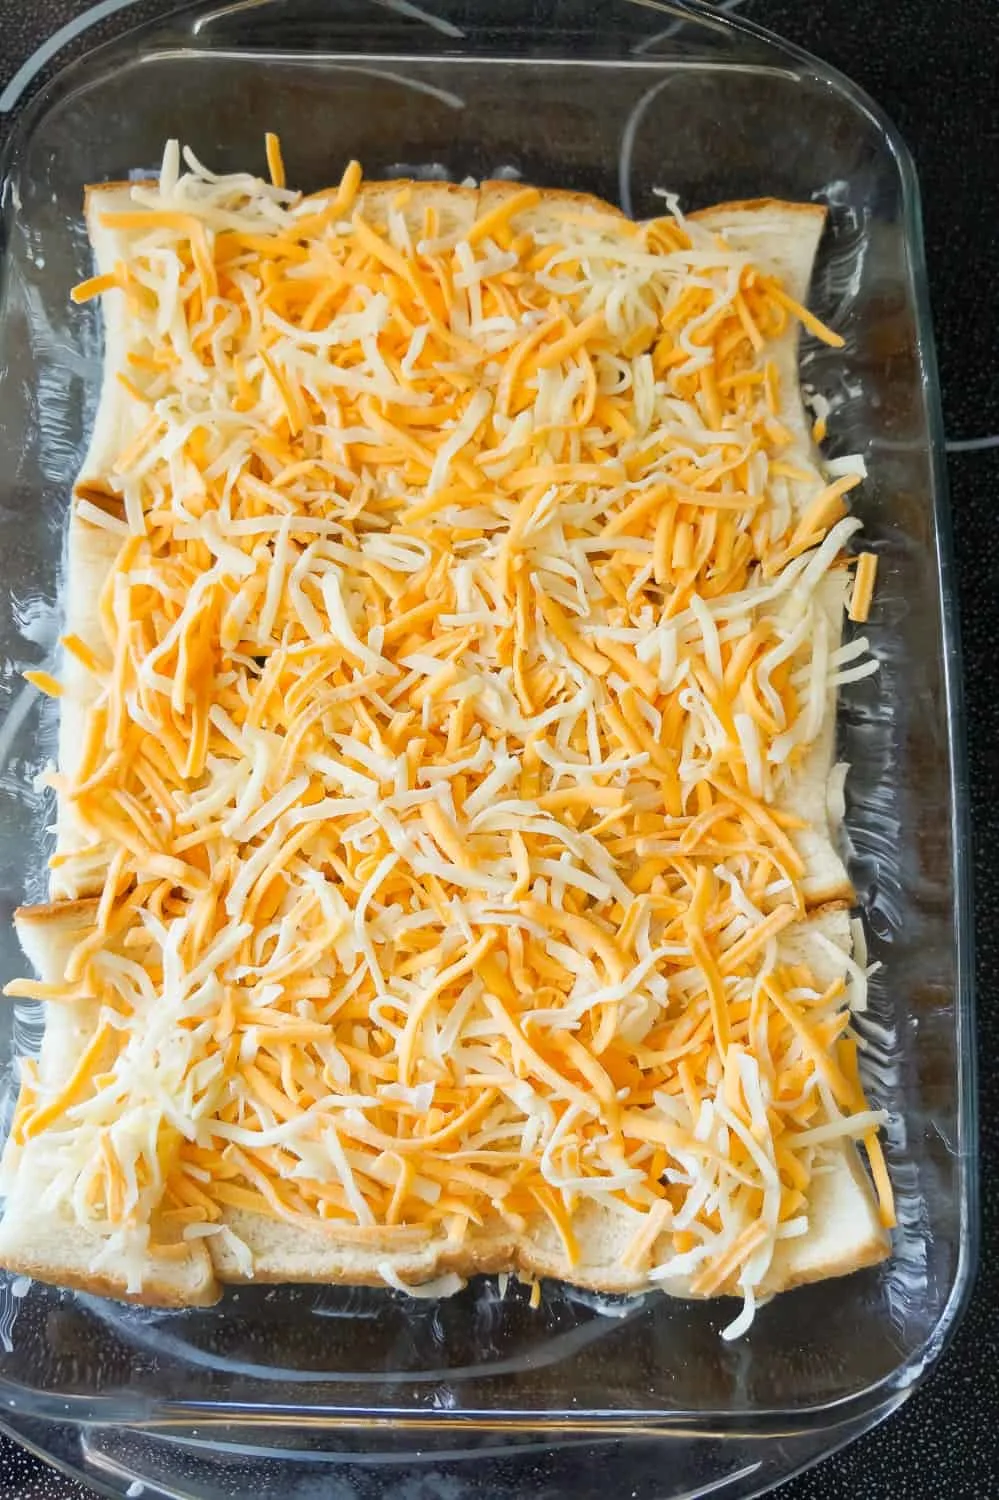 shredded mozzarella and cheddar on top of bread in a baking dish